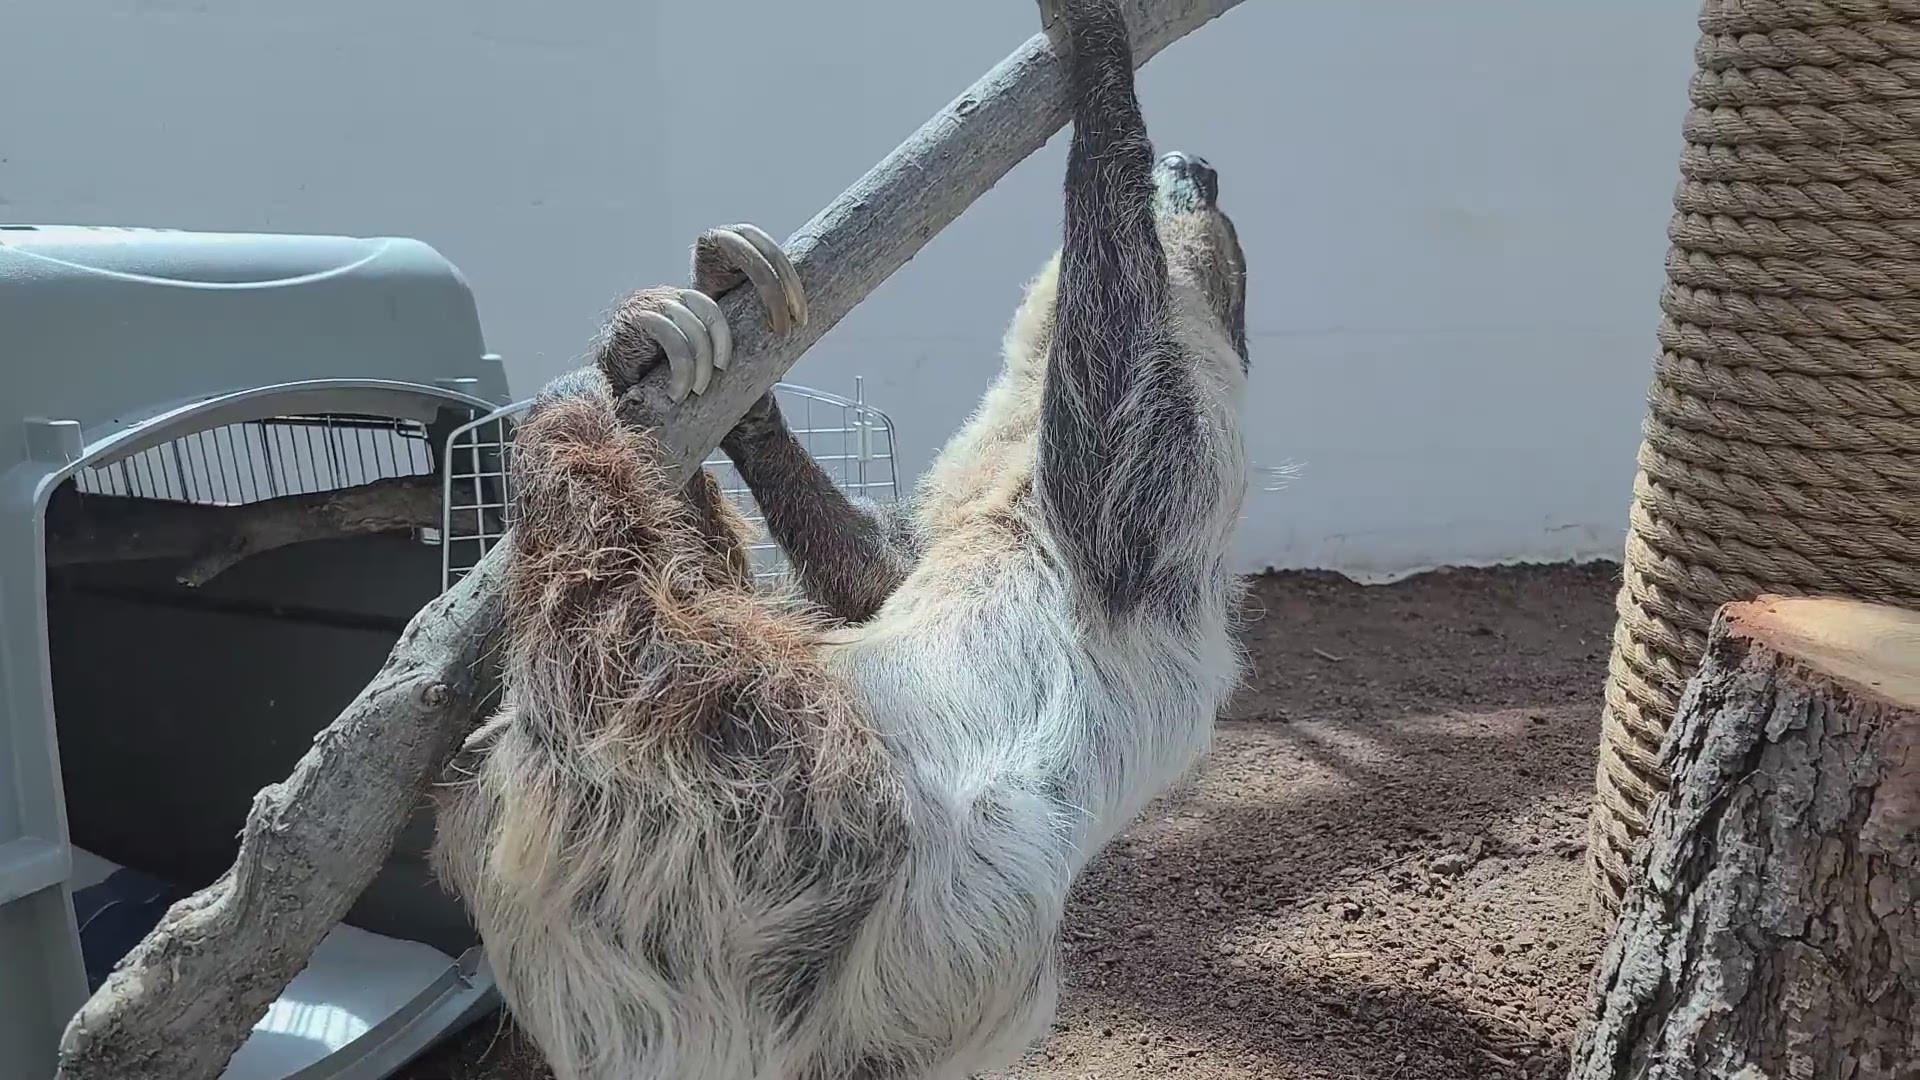 Denver Zoo said a new sloth exhibit gives sloths Charlotte, Elliot and their offspring more space to live their best lives.